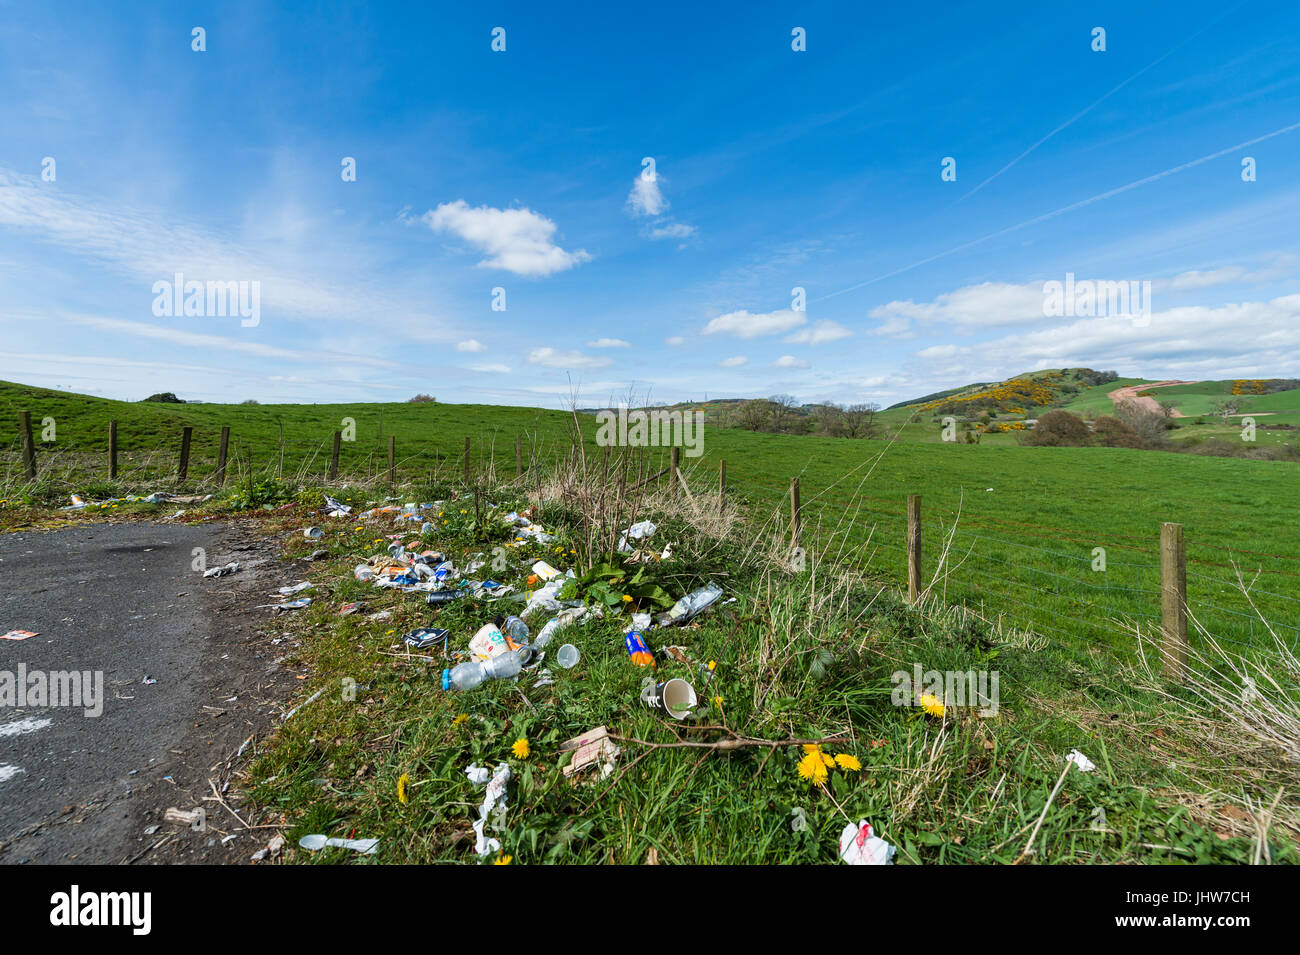 Dumfries, Scotland, UK - April 23, 2017: Discarded litter at the side of a rural road near Dumfries in Dumfries and Galloway, south west Scotland. Stock Photo